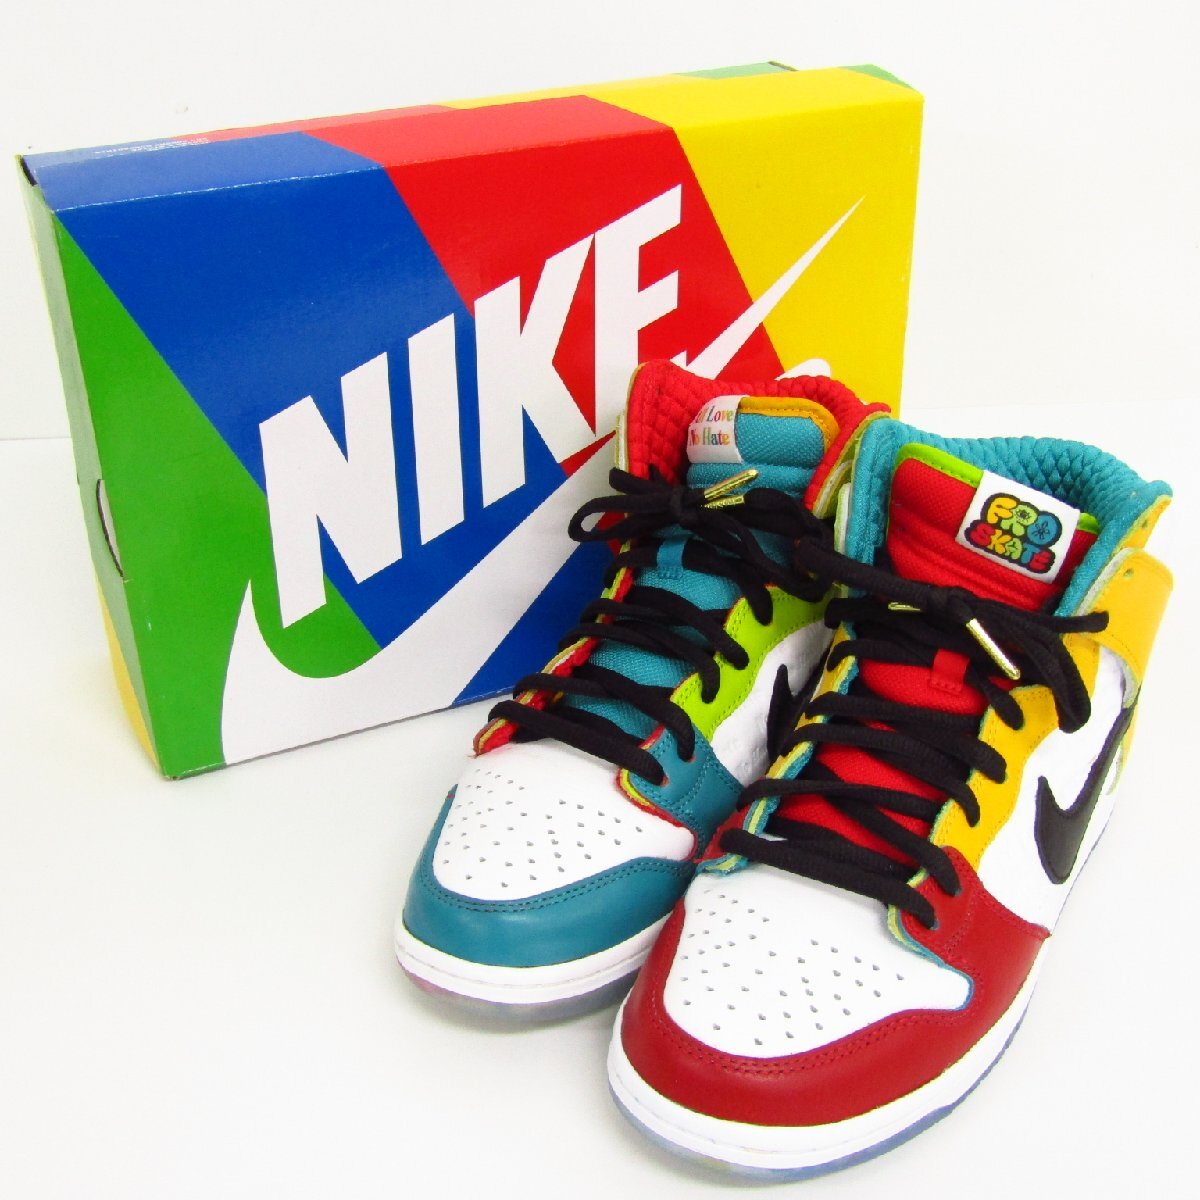 FROSKATE × NIKE SB DUNK HIGH PRO QS ”All Love” DH7778-100 FROスケート × ナイキ SIZE:27.0cm スニーカー 靴 〓A9815の画像1